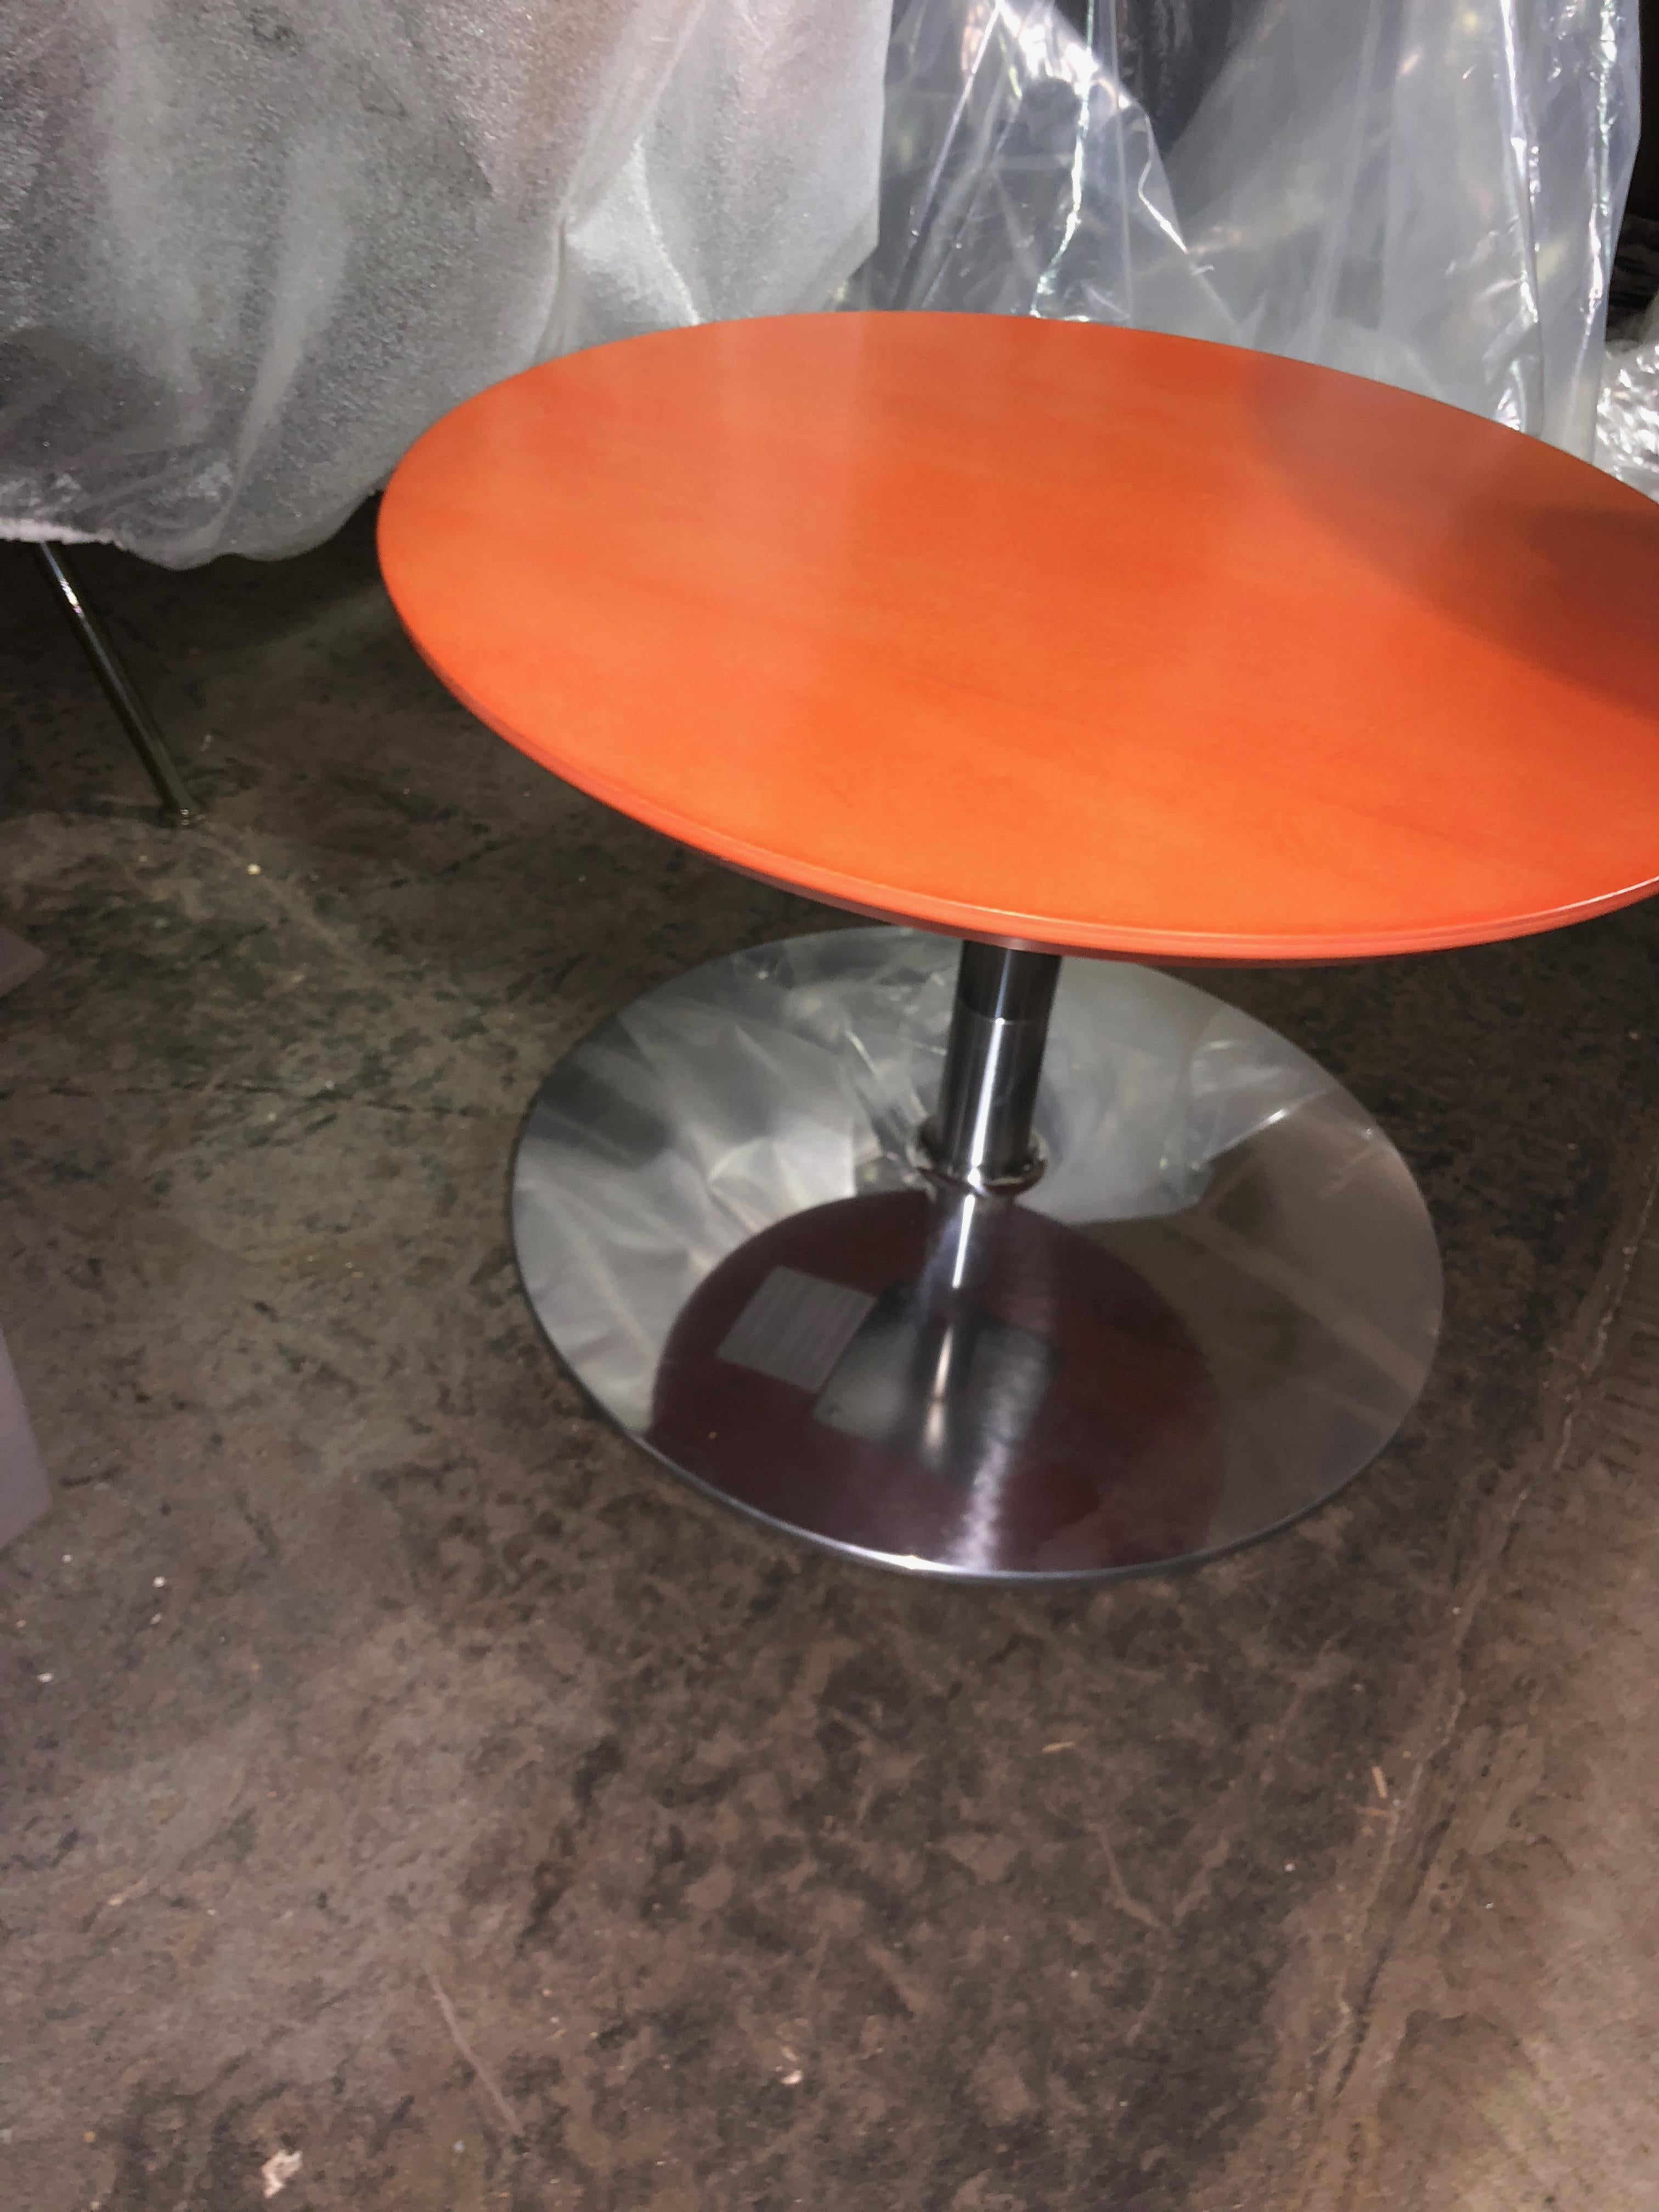 The foot as a perfect circle and the result is a beautiful table. A simple design is a delight forever. The base is chrome-plated and the tabletop is made of veneer.
Base
Polished aluminium disc with chrome tube.